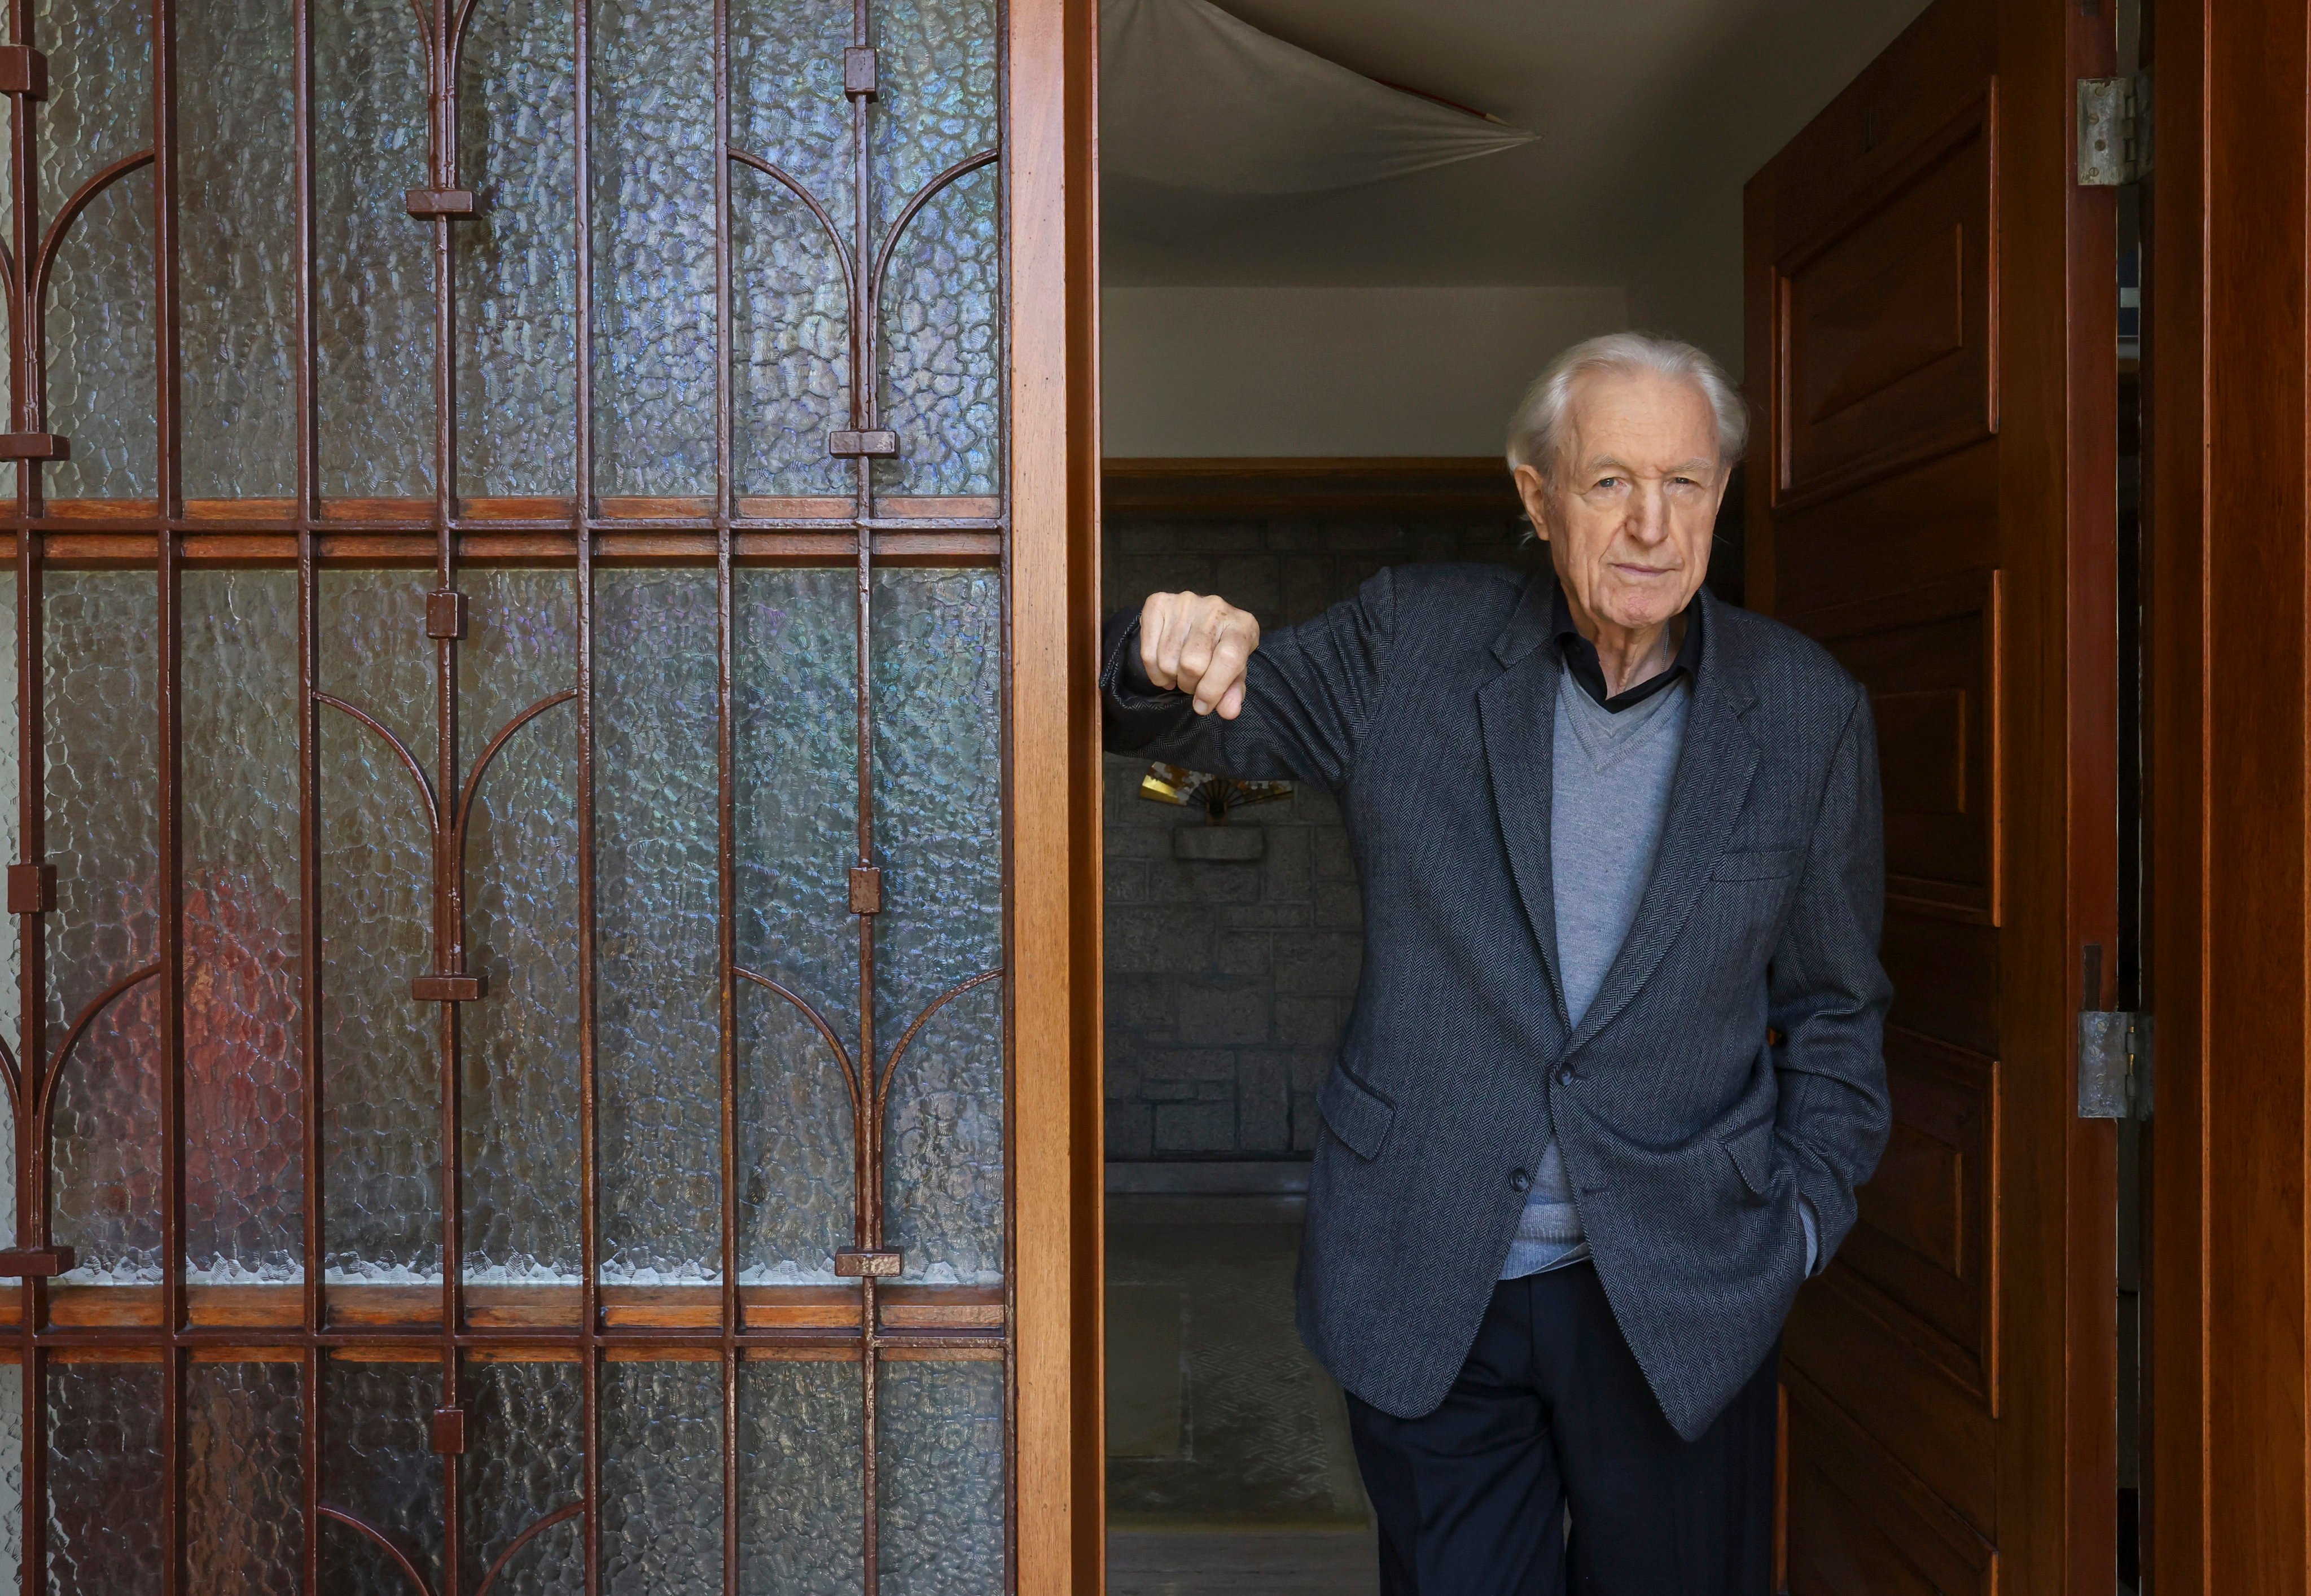 Klaus Heymann, founder of the Naxos record label and chairman of the Naxos Music Group, at his home in Kowloon, Hong Kong, in February 2023. Photo: Jonathan Wong